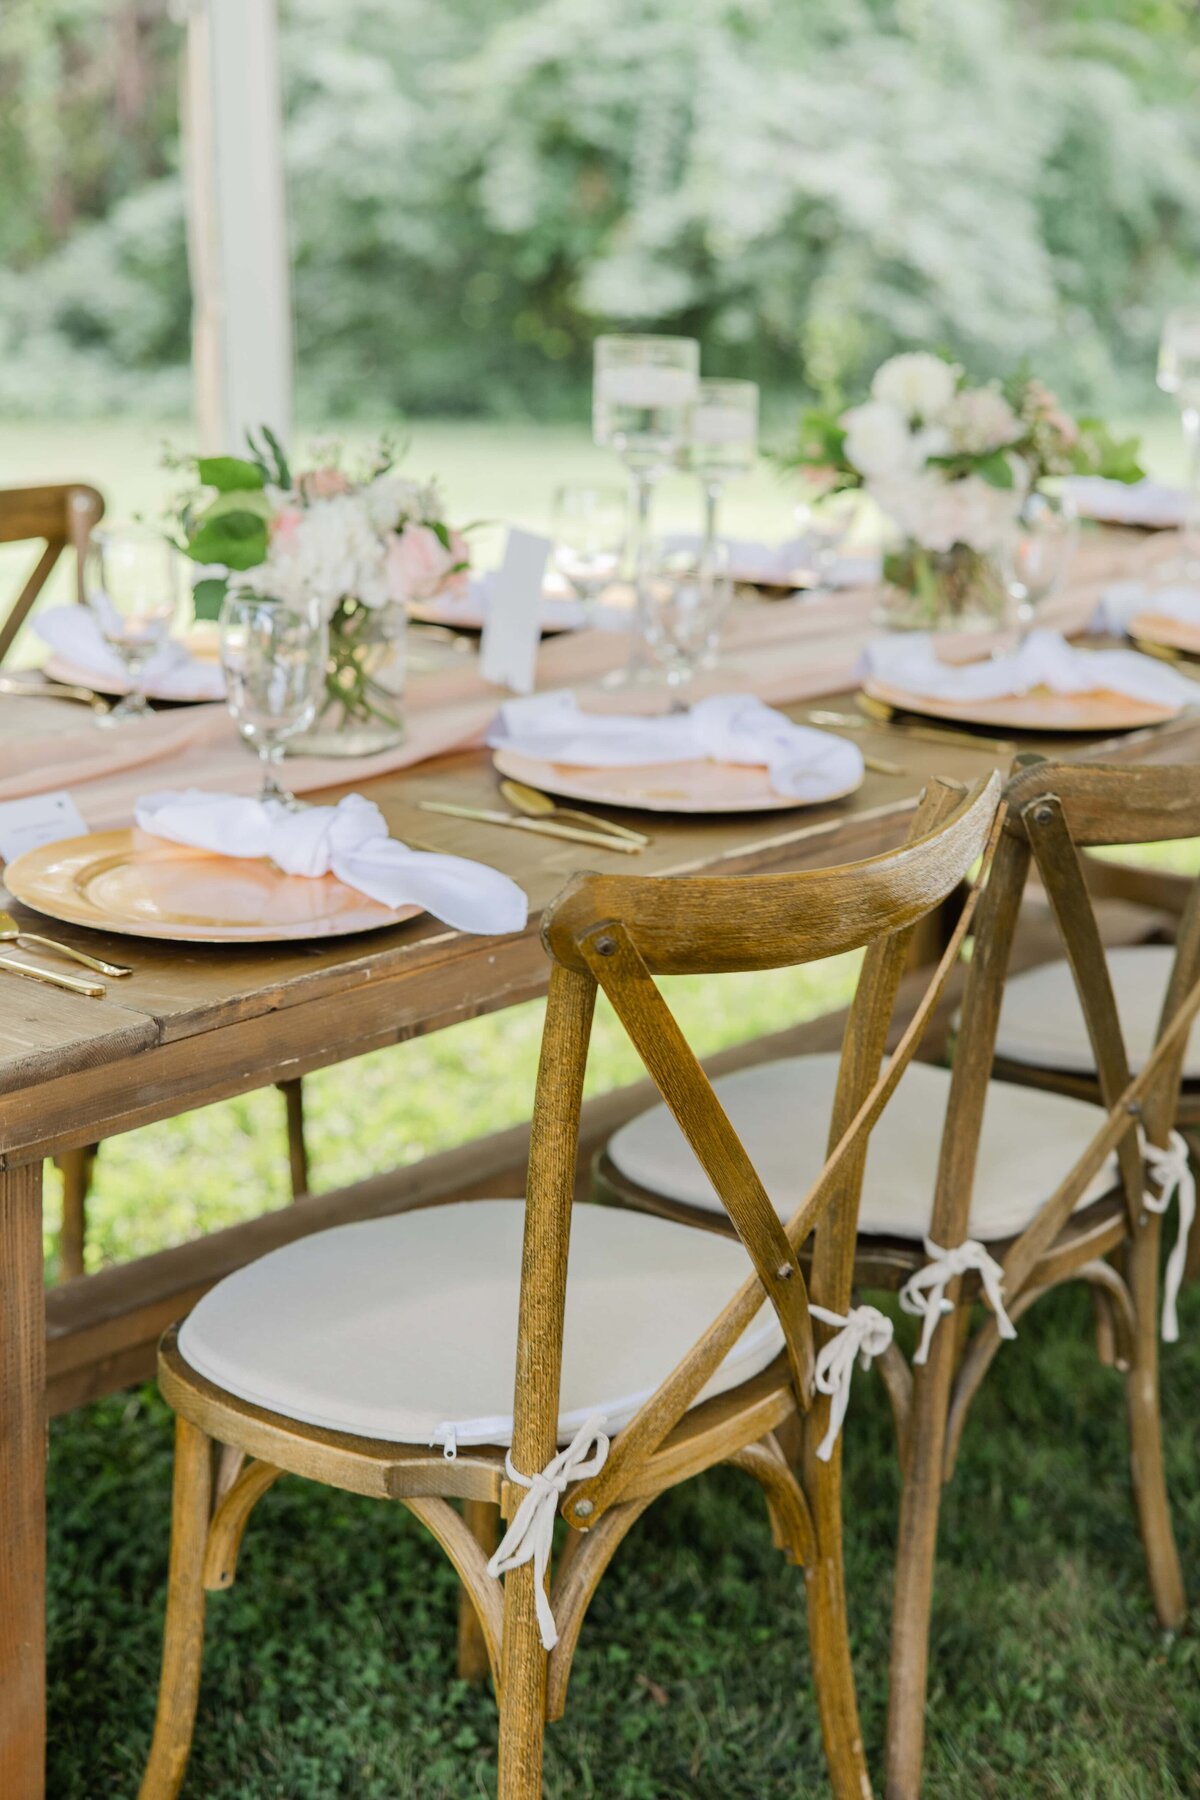 Elegant outdoor wedding table setup with wooden chairs, floral centerpieces, and fine dining ware on a lush green lawn at an Iowa park farm.